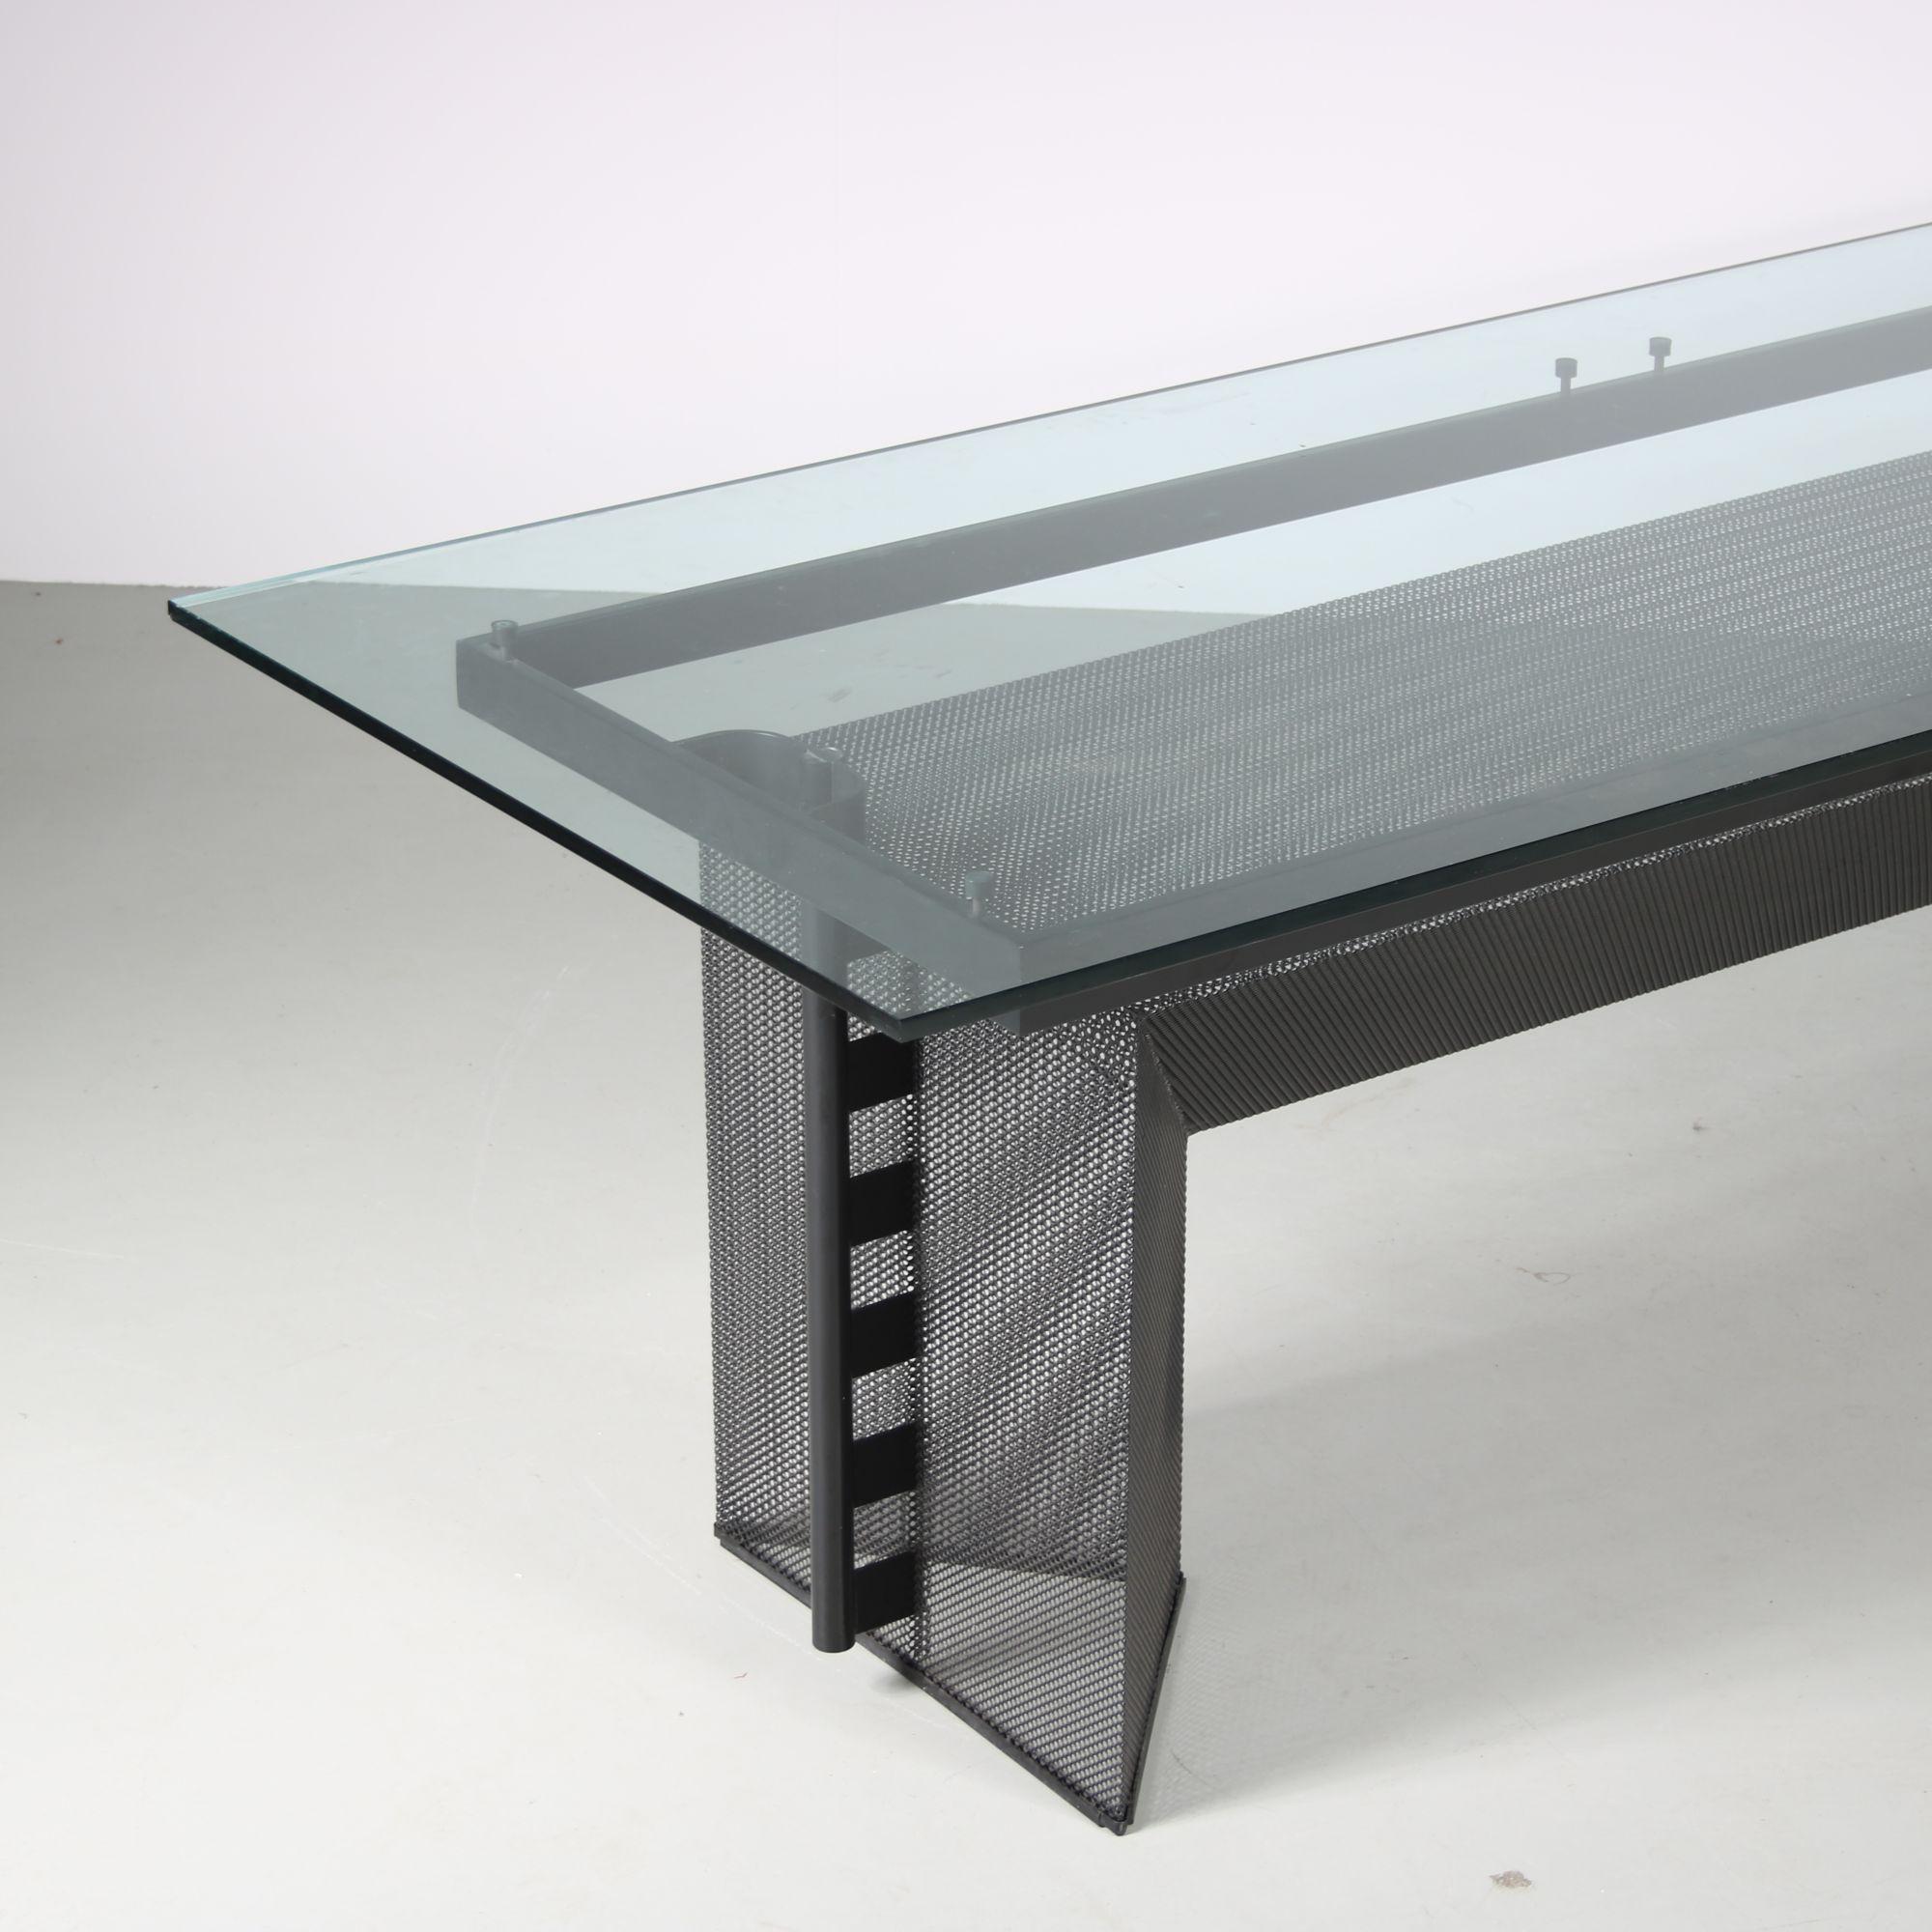 Lacquered Mario Botta 'Tesi' Dining Table or Desk for Alias, Italy 1986.  For Sale